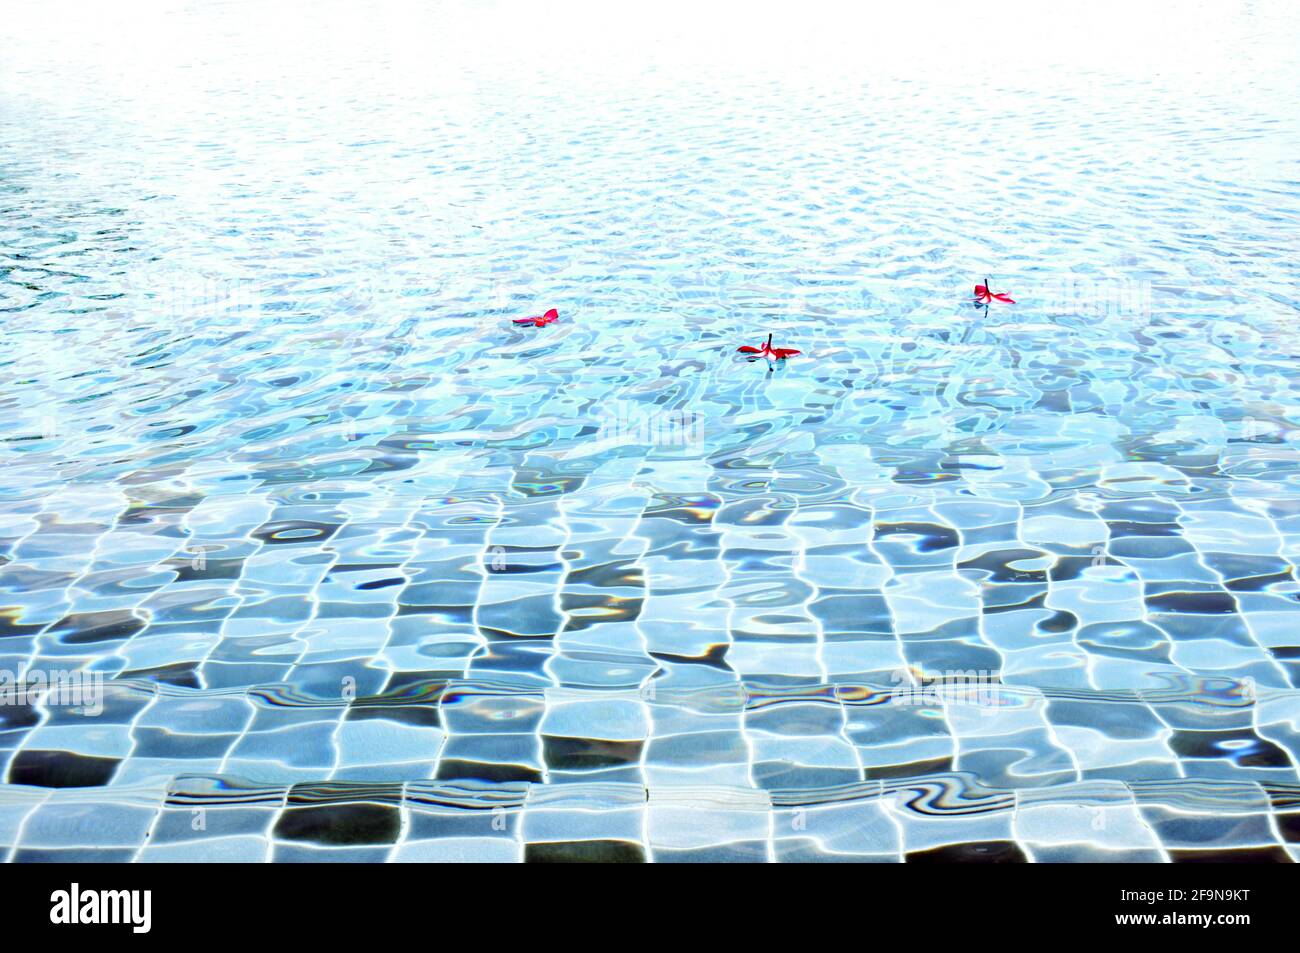 Rippled water texture in swimming pool Stock Photo